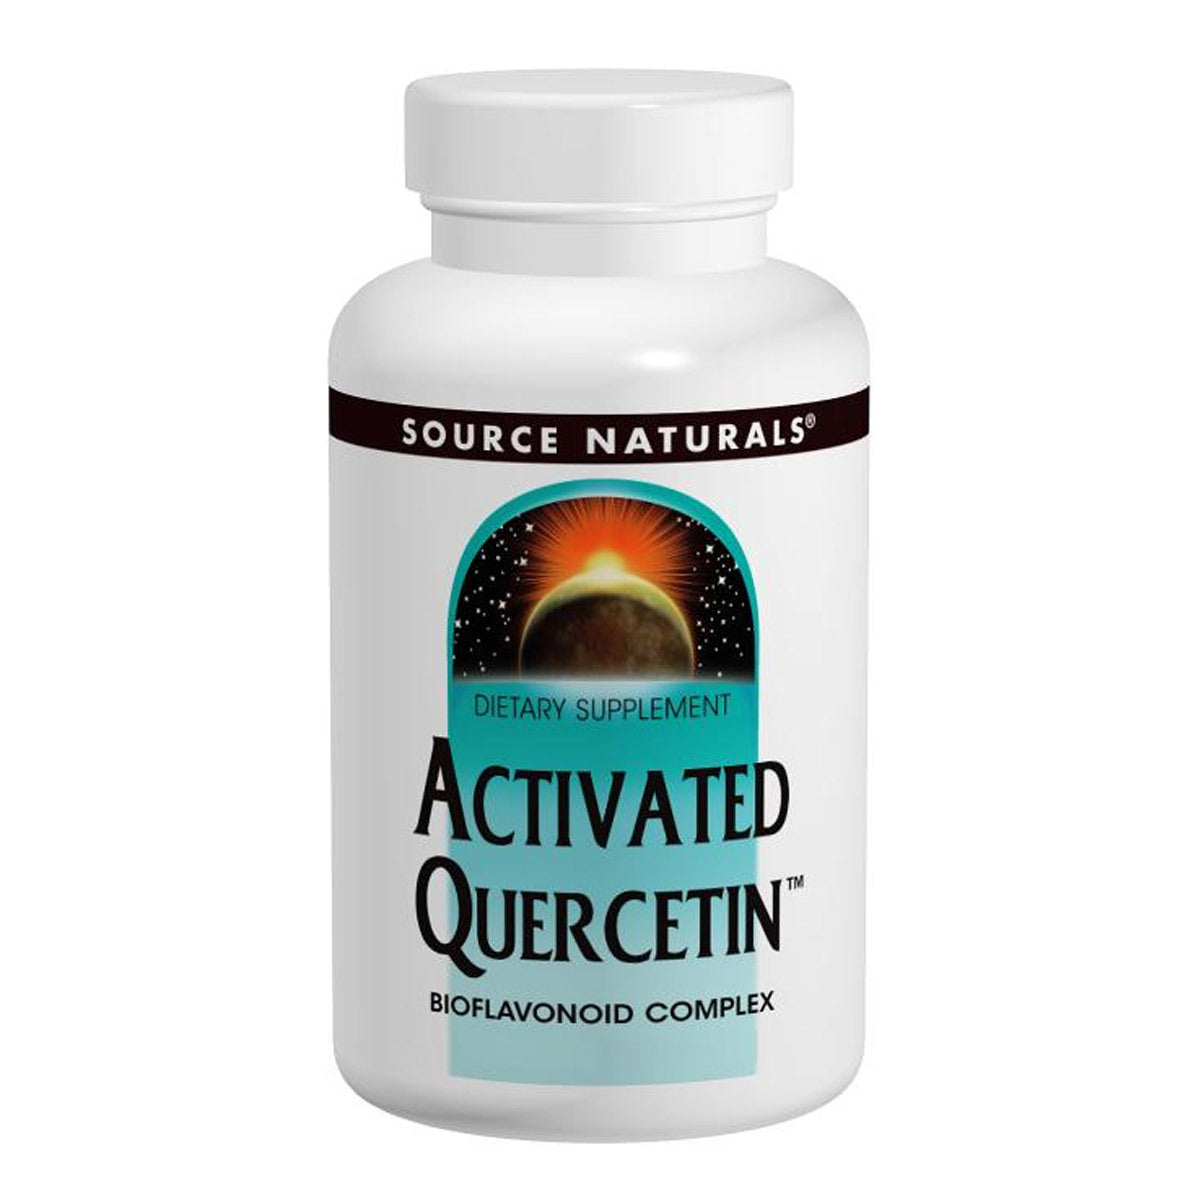 Primary image of Activated Quercetin